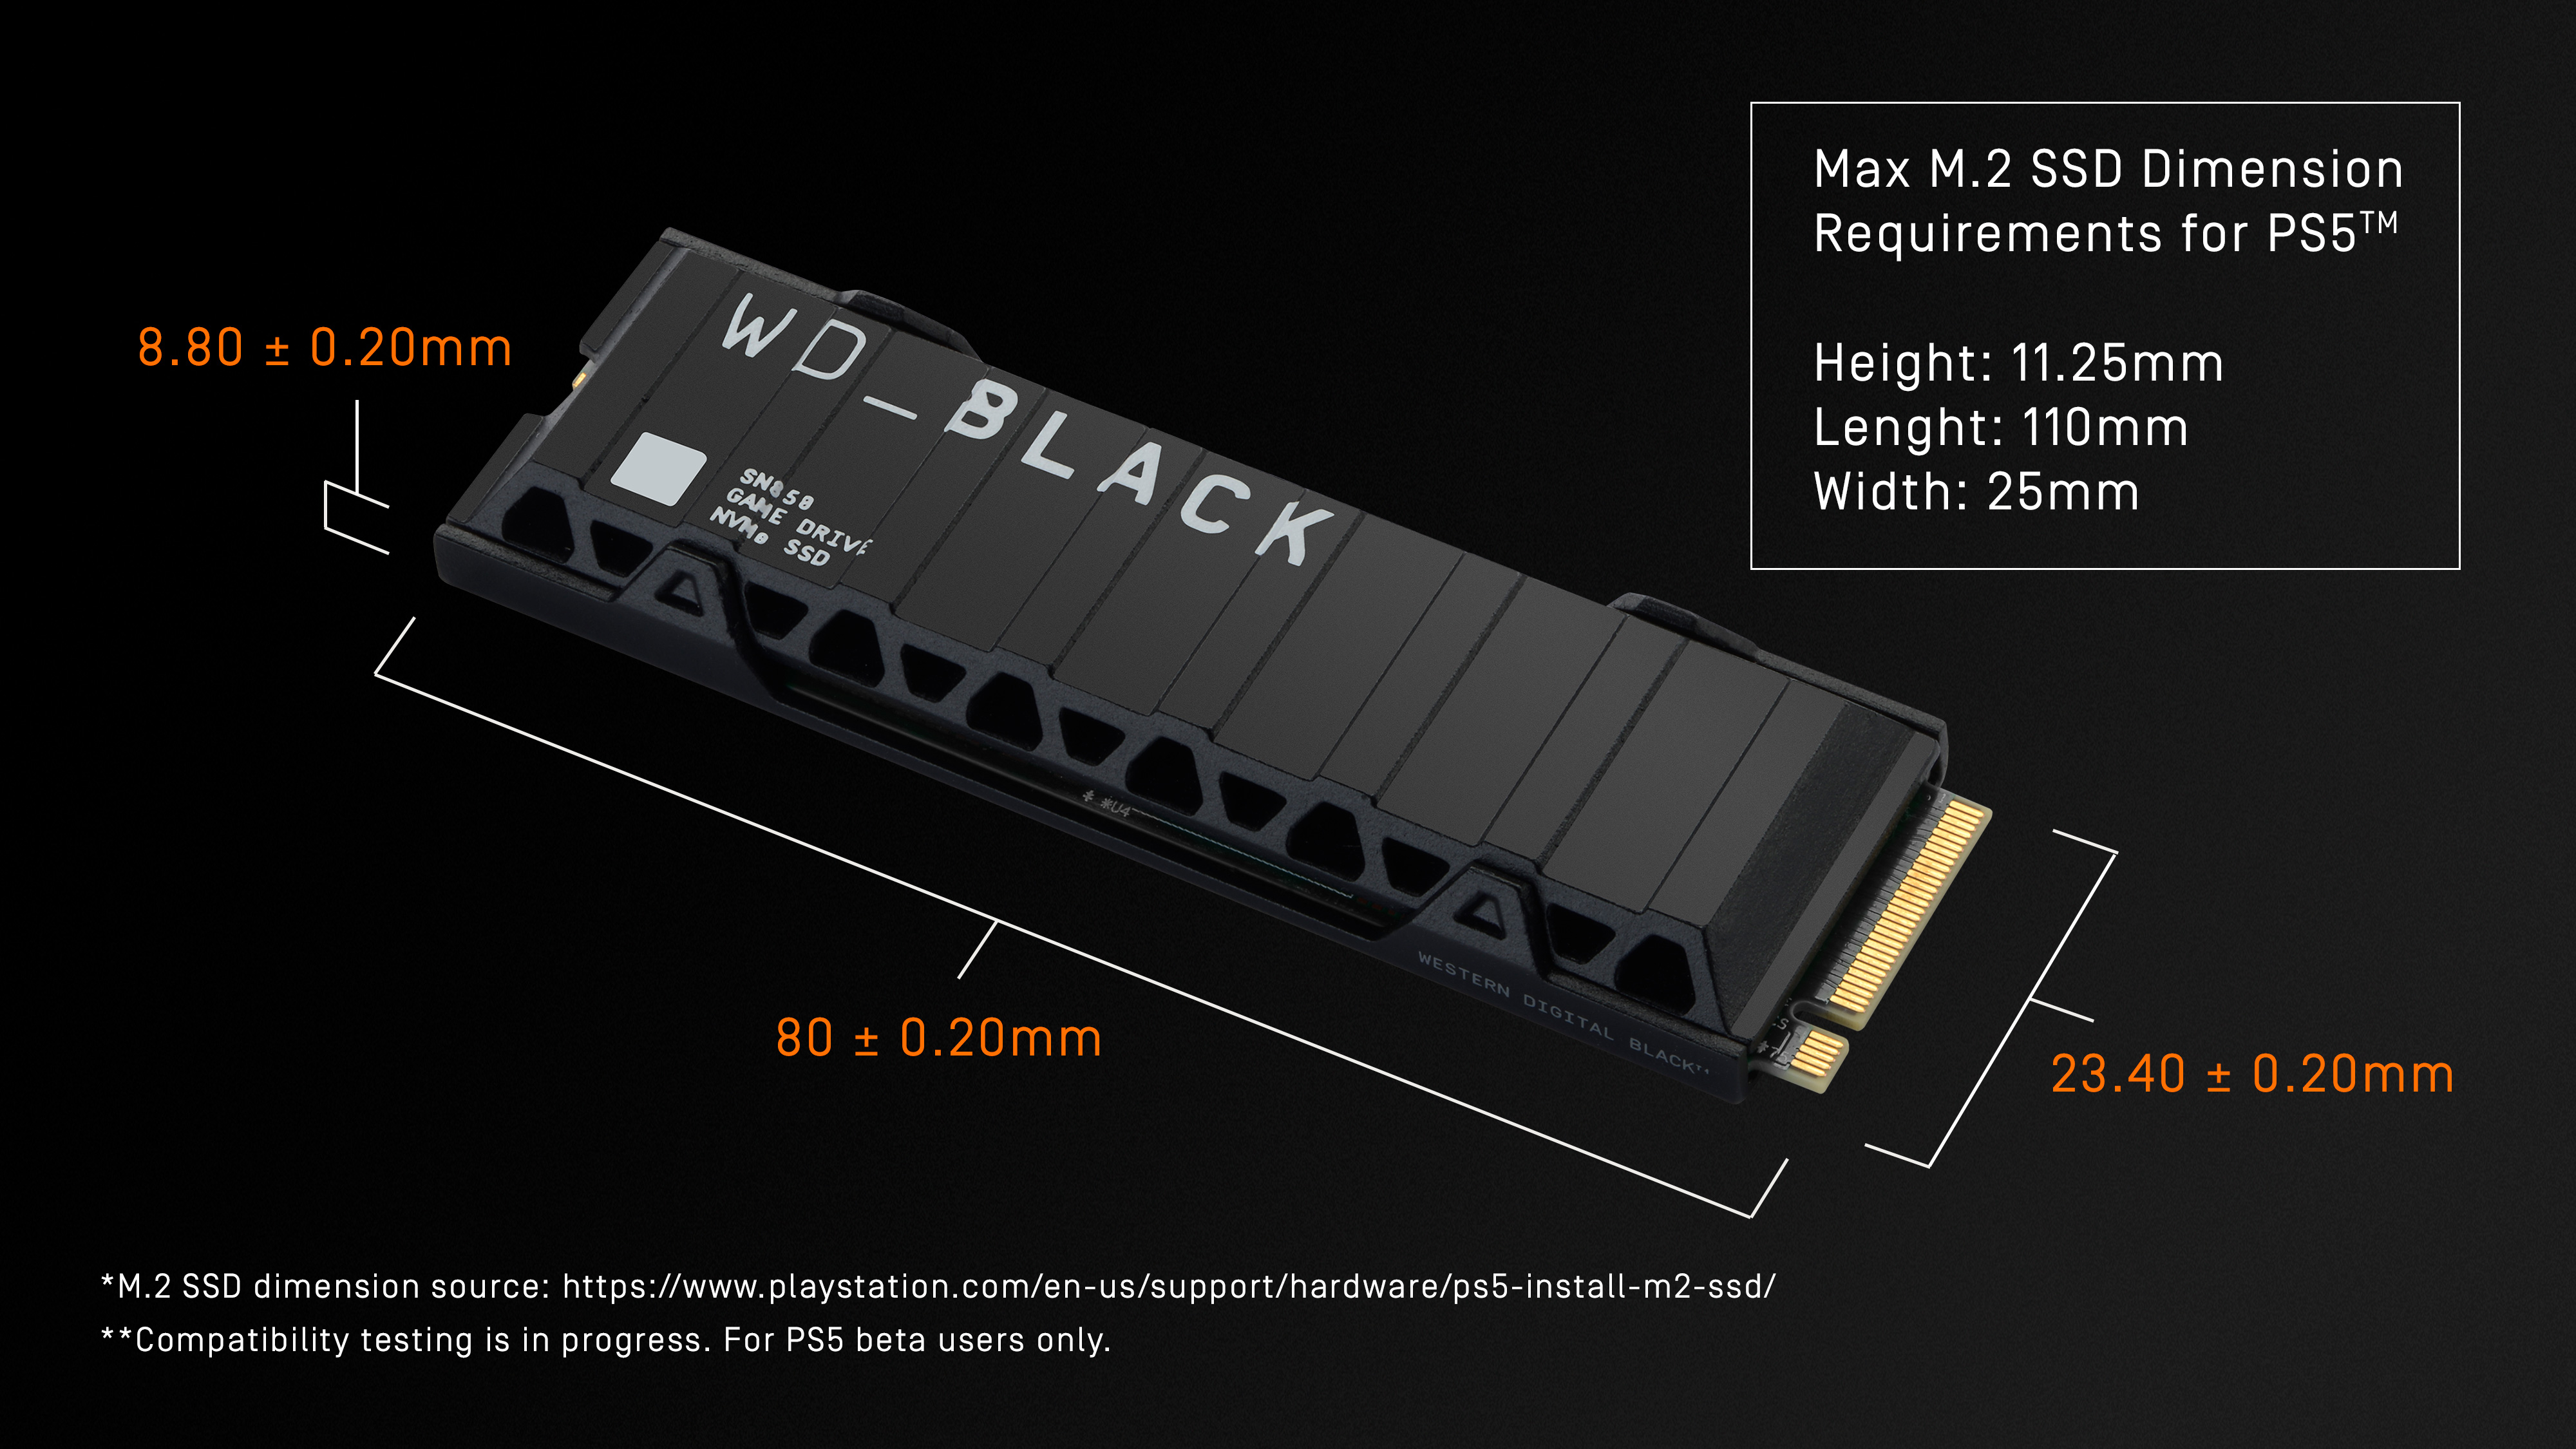 Wd Black For Those Who Care About Specs Get Our Wdblack Sn850 Nvme Ssd With Heatsink Here T Co Zhvcp6dv9u T Co L7yagctawc Twitter